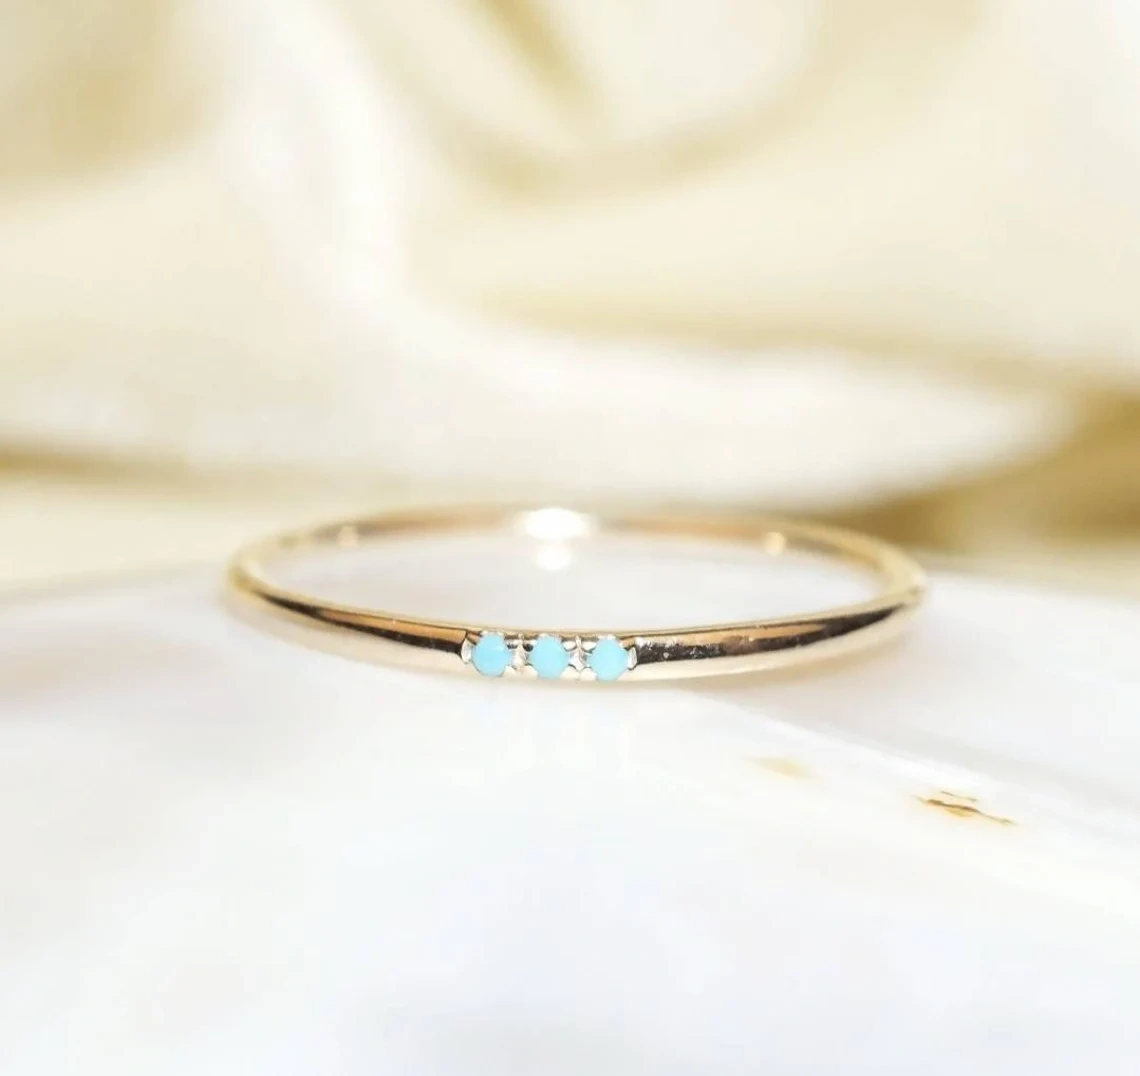 10K Solid Gold 1mm Turquoise Studded Dainty Ring Stacking Semi Precious Stone Minimalist Ring Inset Round Tiny handmade Unique Simple Ring-11417398